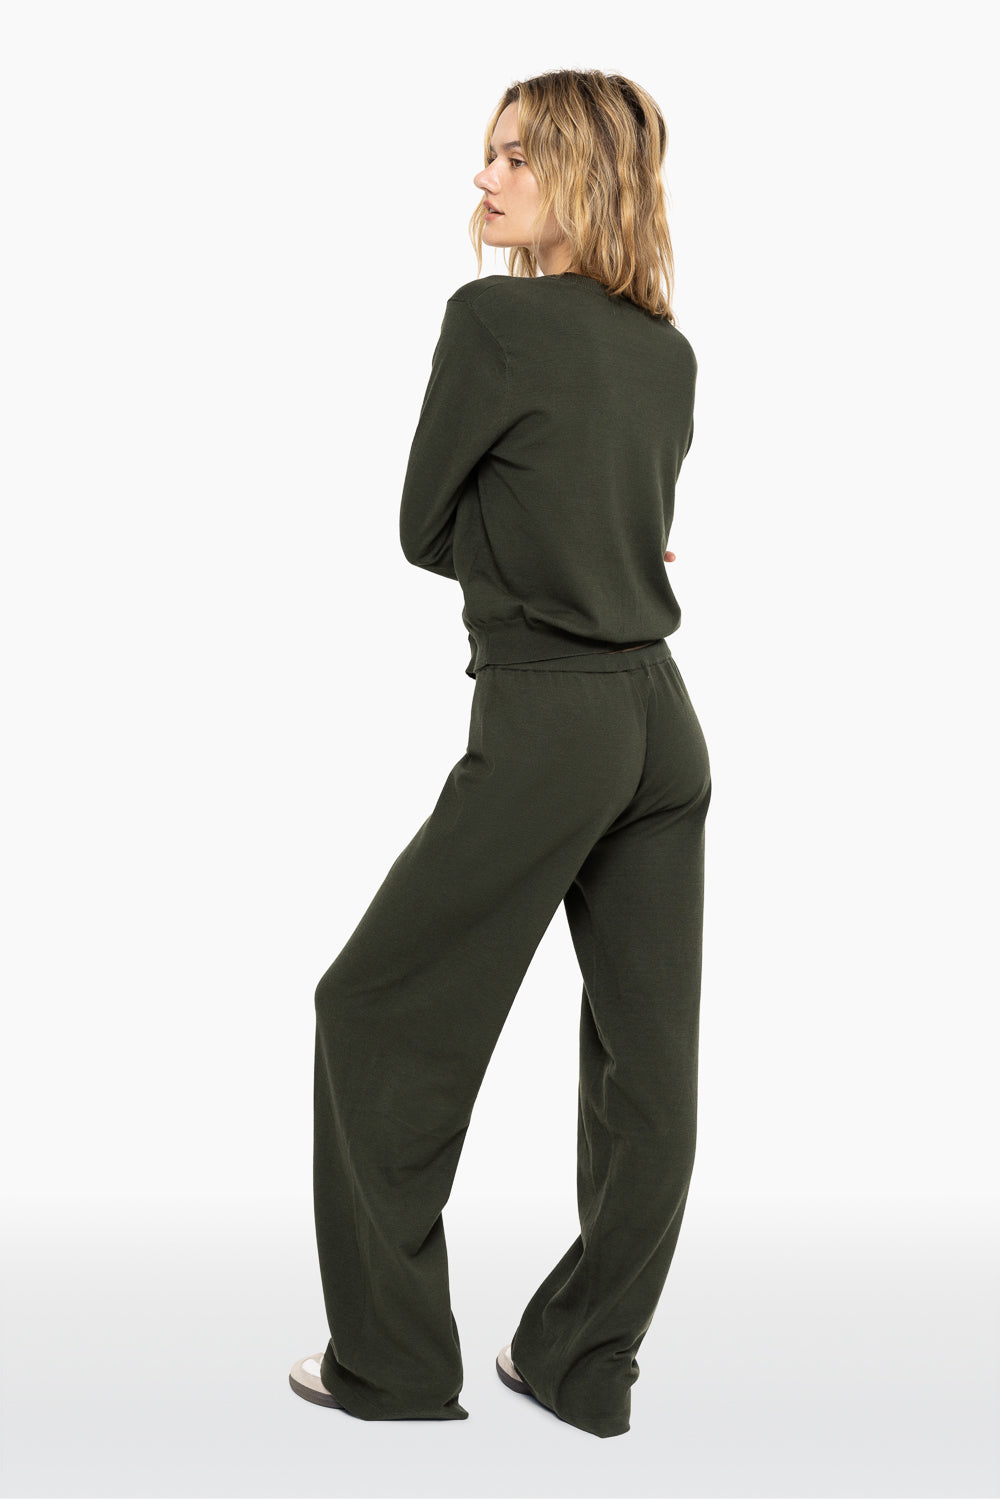 SET™ FLAT KNIT EVERYDAY PANTS IN HUNTER